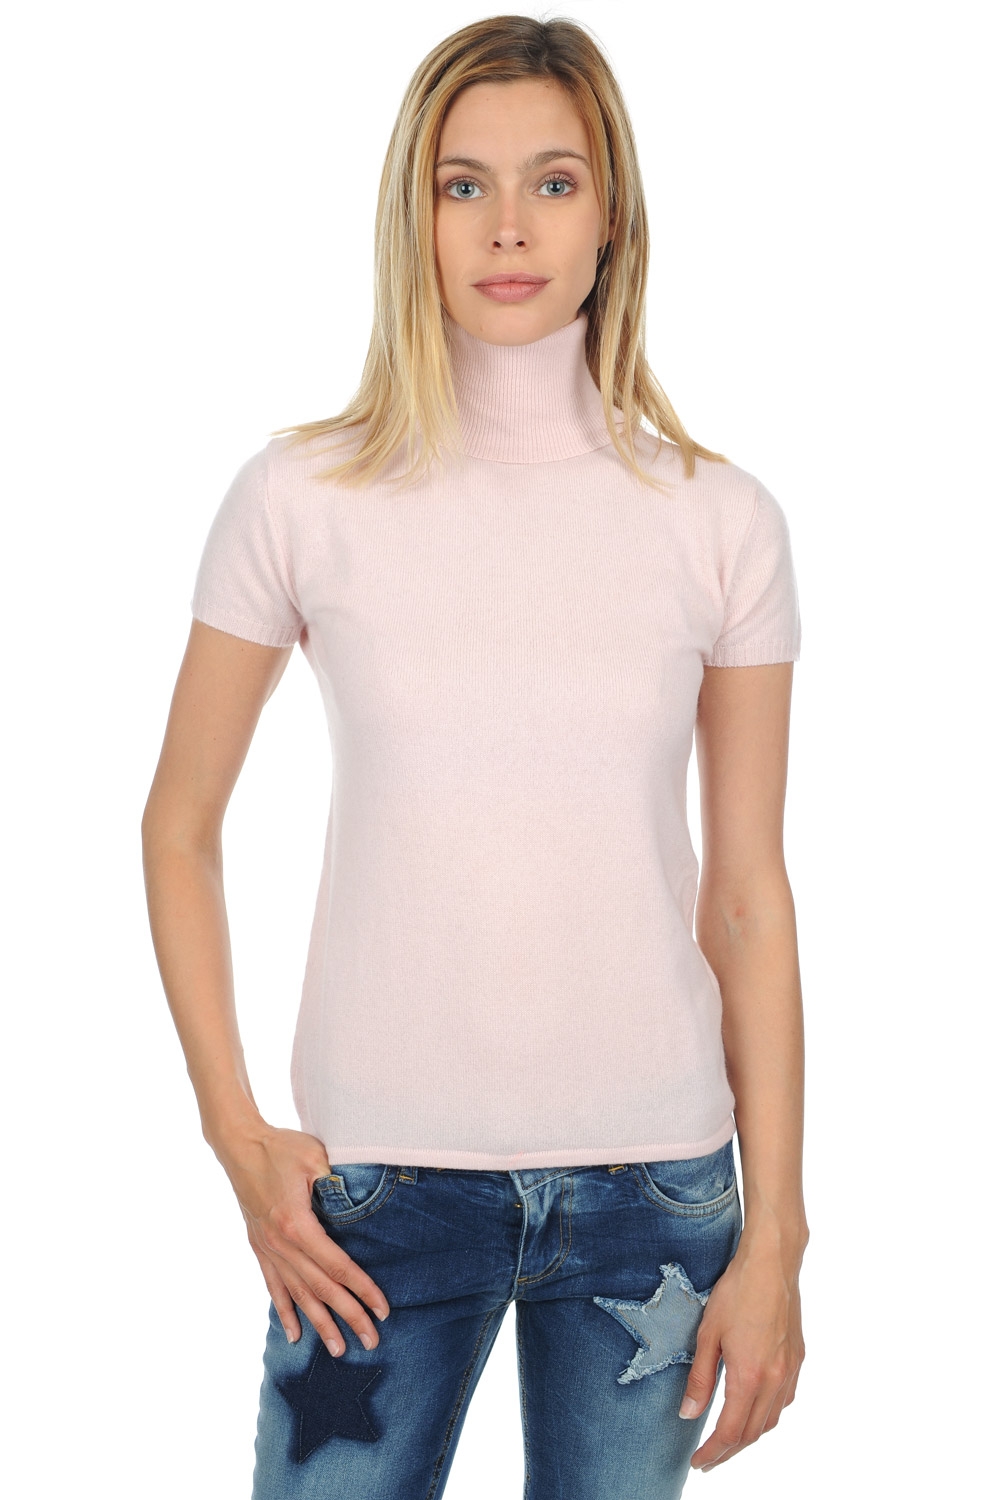 Cachemire pull femme col roule olivia rose pale l